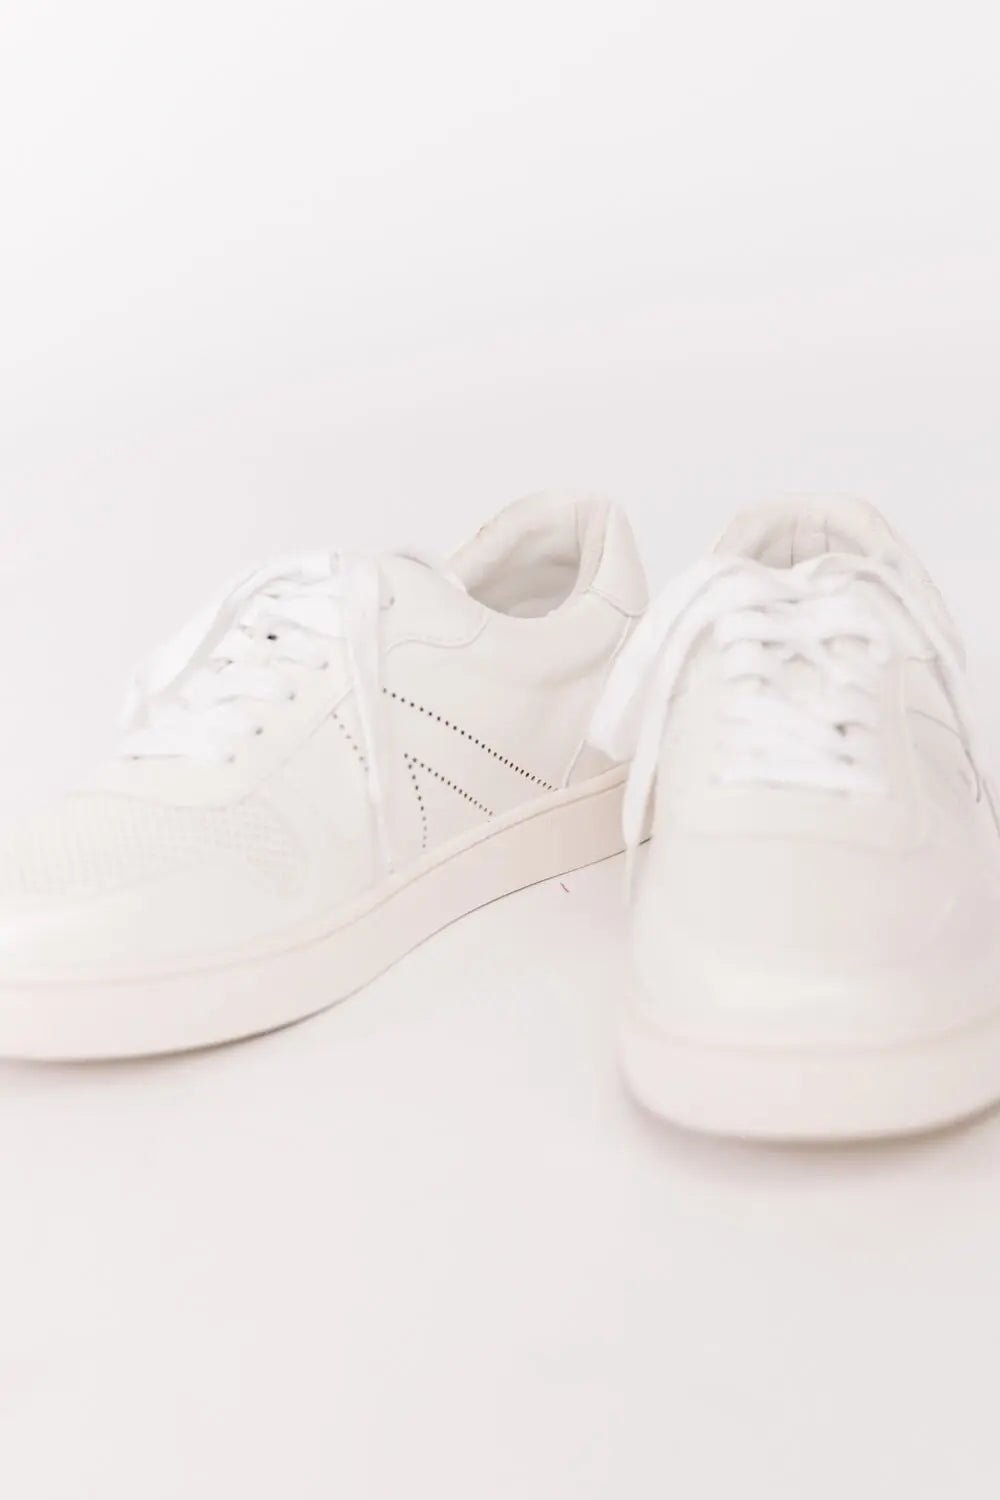 Everlasting Stroll White Lace-Up Sneakers - JO+CO